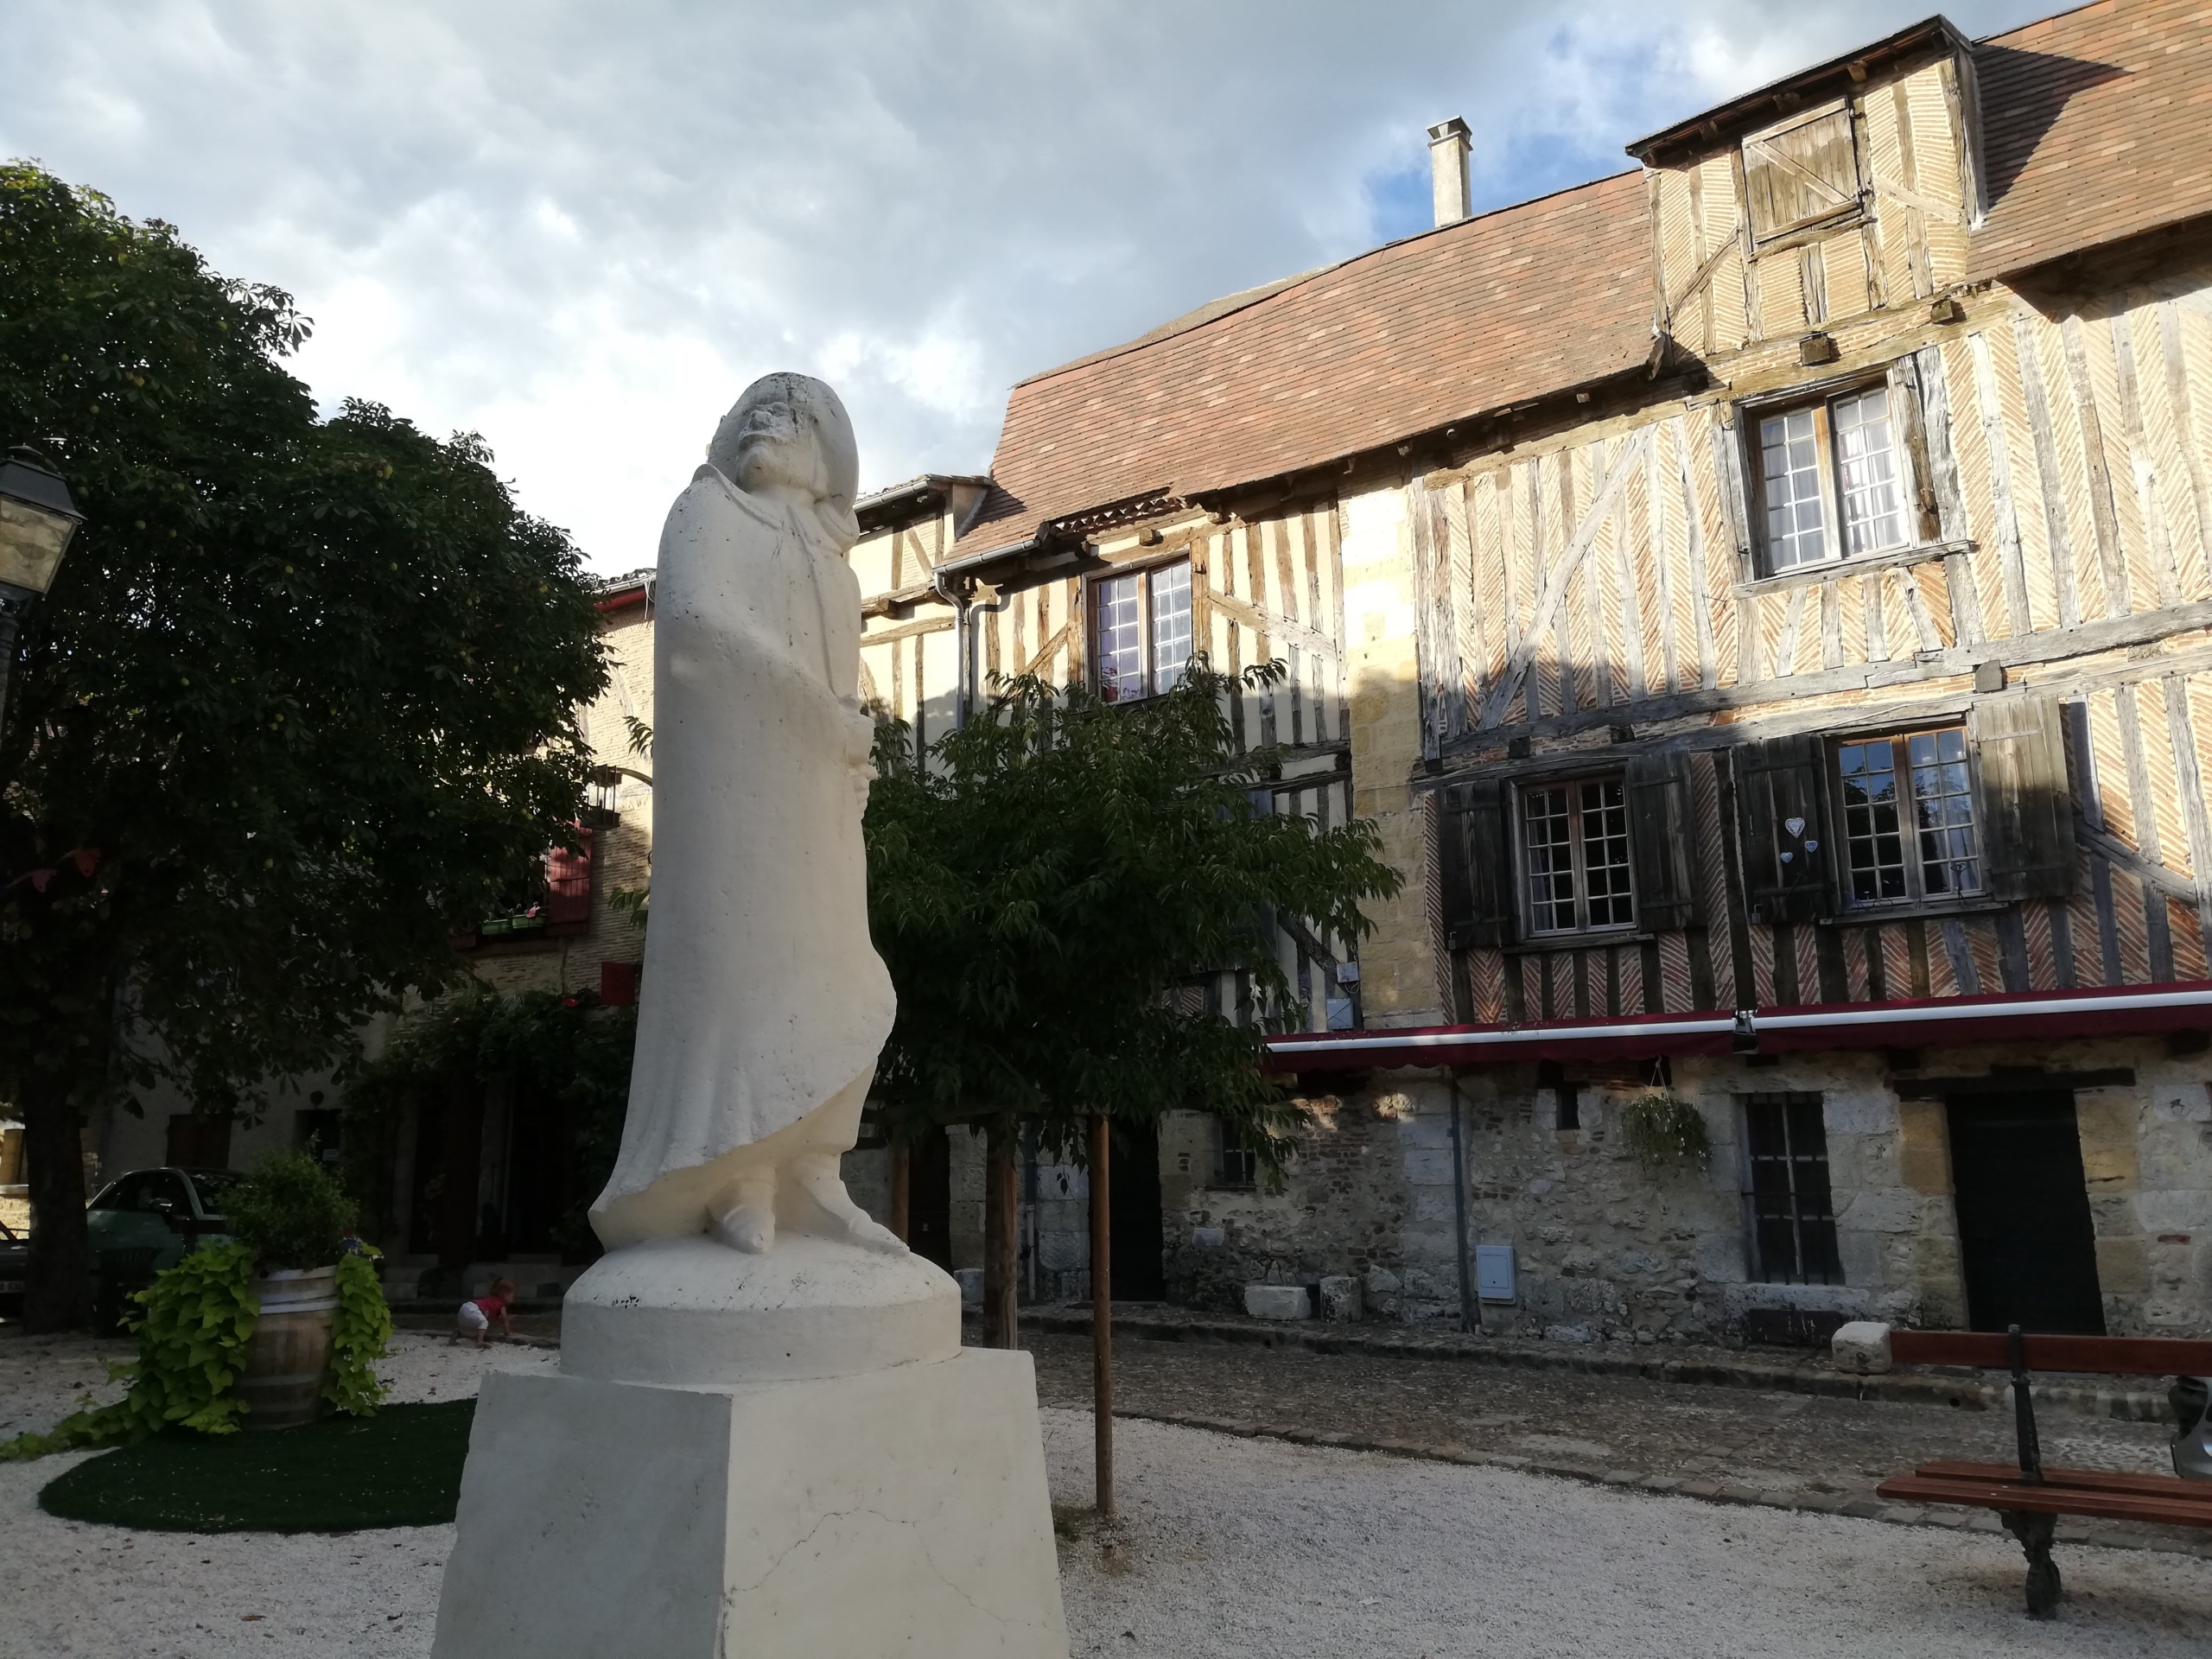 Bergerac travel tips: what to do, what to see, and what to try